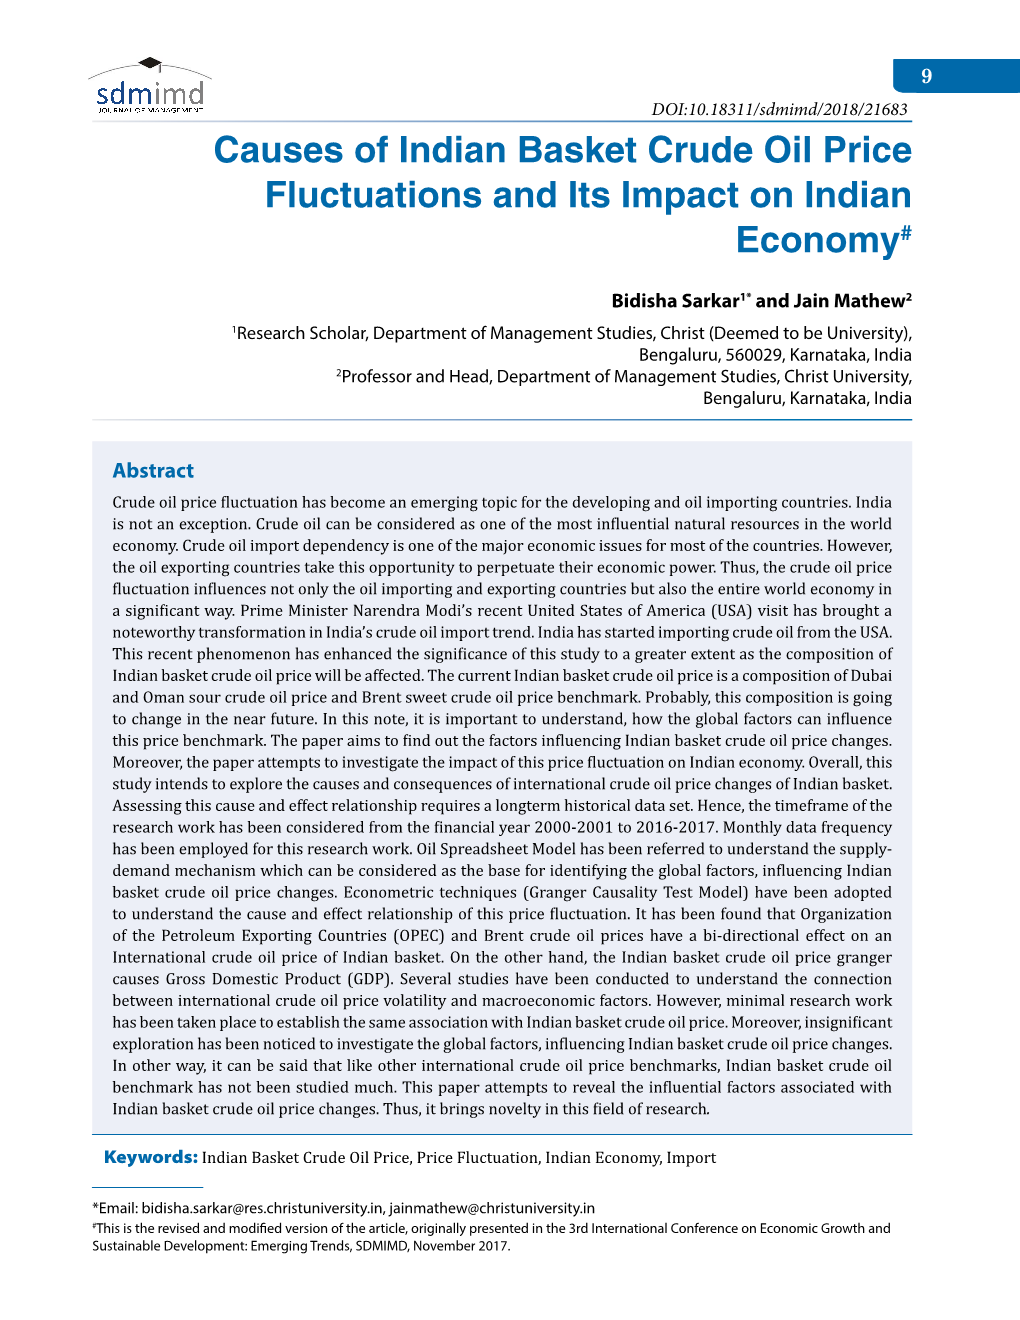 Causes of Indian Basket Crude Oil Price Fluctuations and Its Impact on Indian Economy